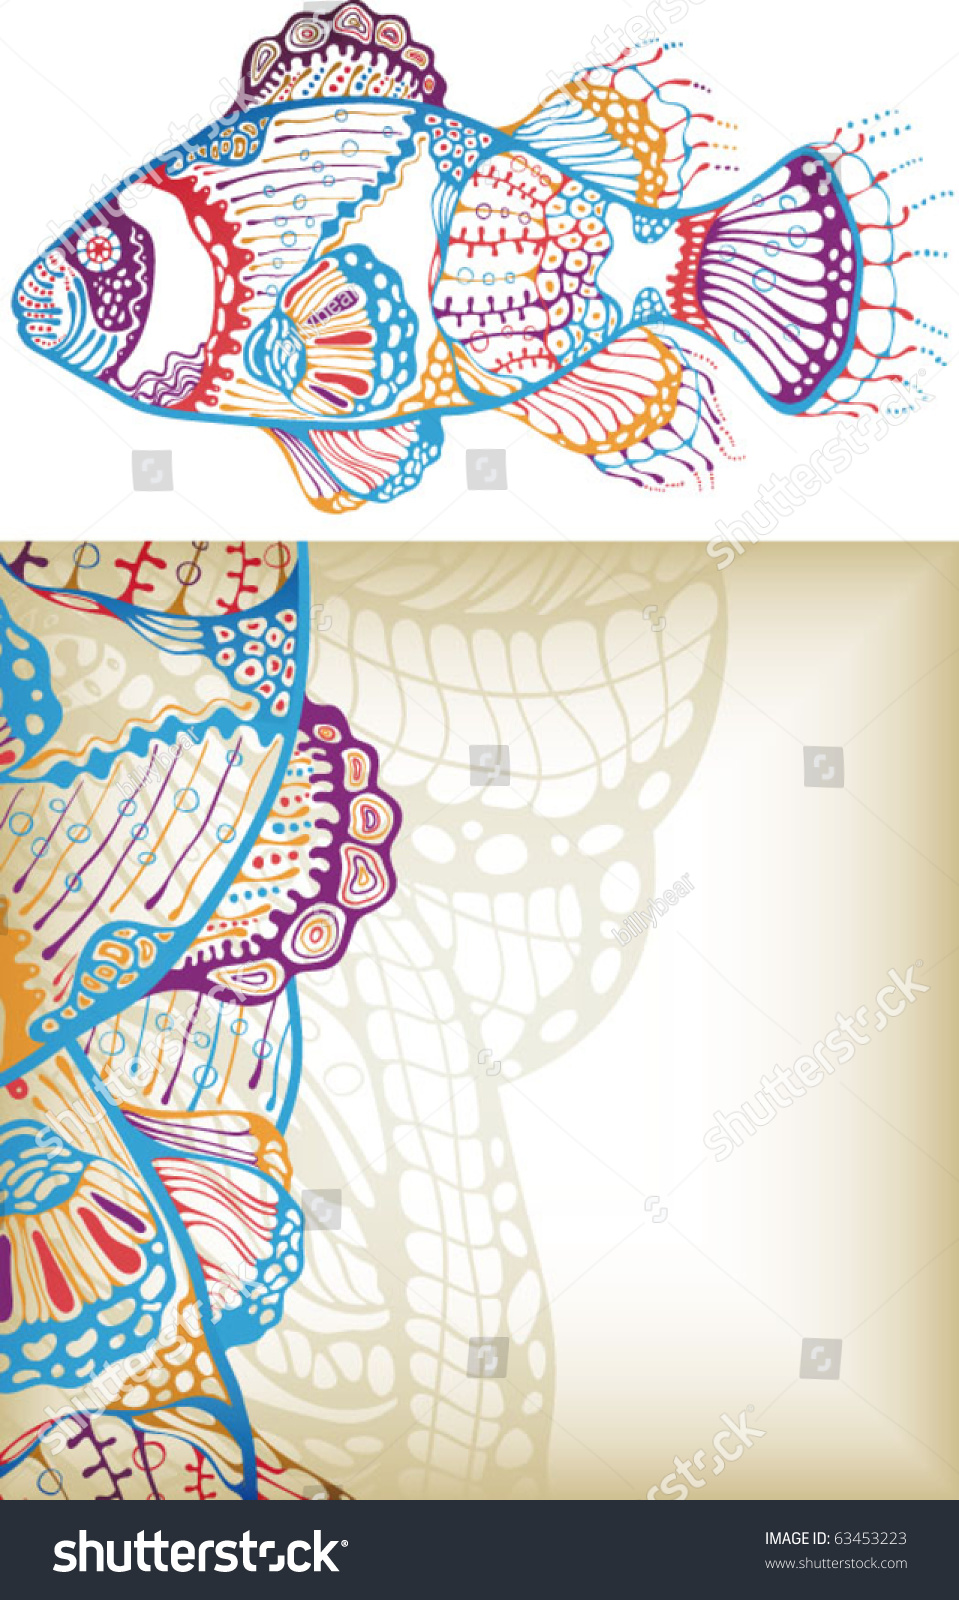 Abstract Fish Background Stock Vector Illustration 63453223 : Shutterstock